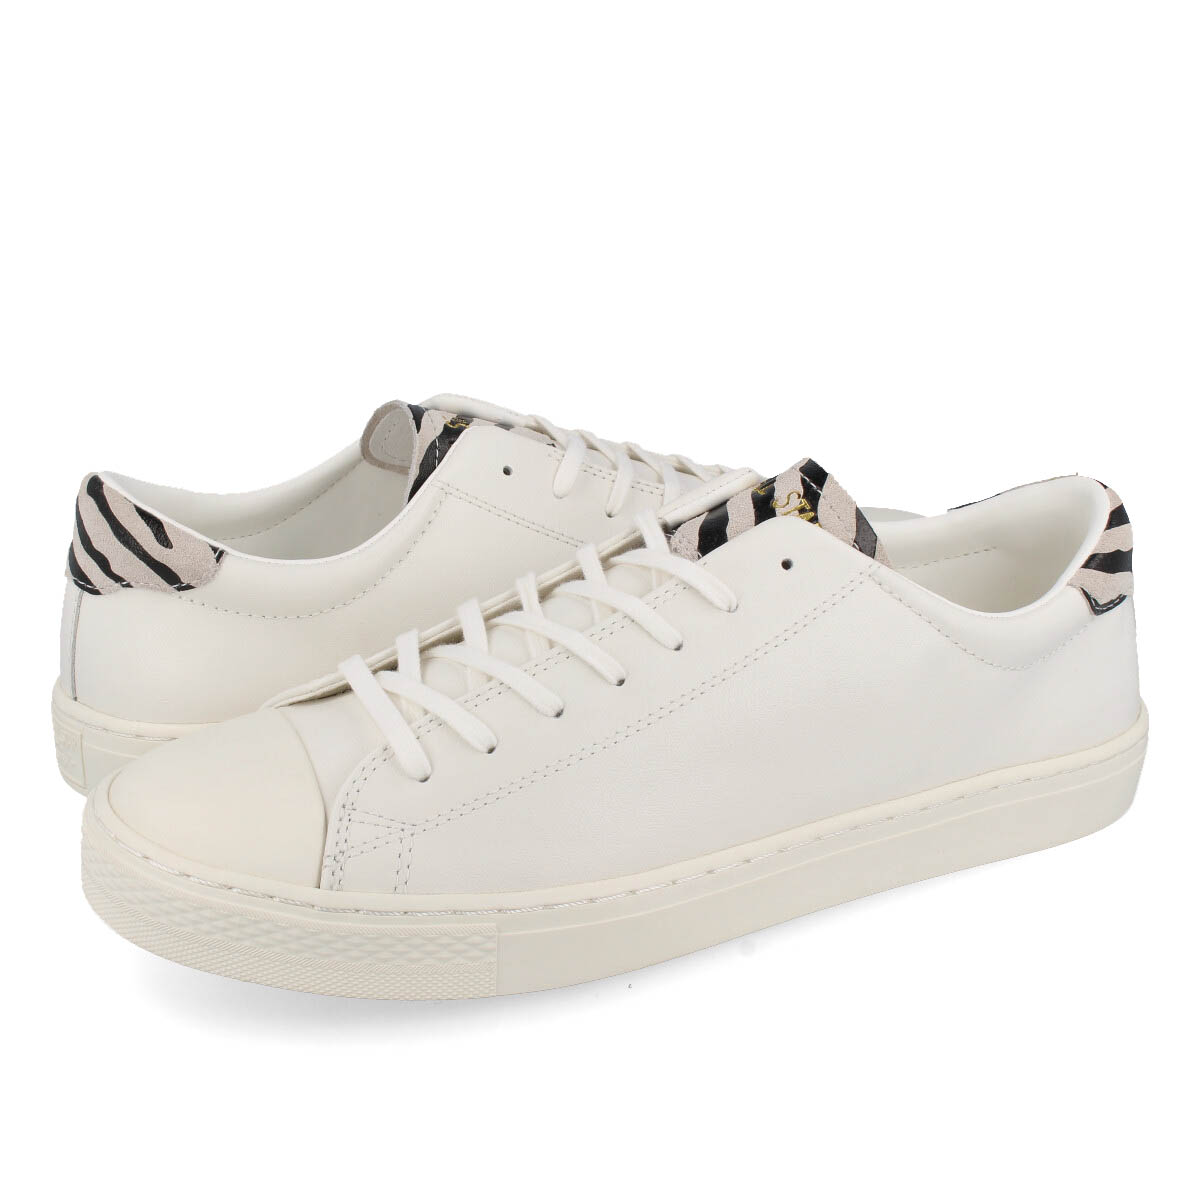 CONVERSE ALL STAR COUPE POINTANIMAL OX コンバース オールスター クップ ポイントアニマル OX  WHITE/ZEBRA 31305960 | SELECT SHOP LOWTEX